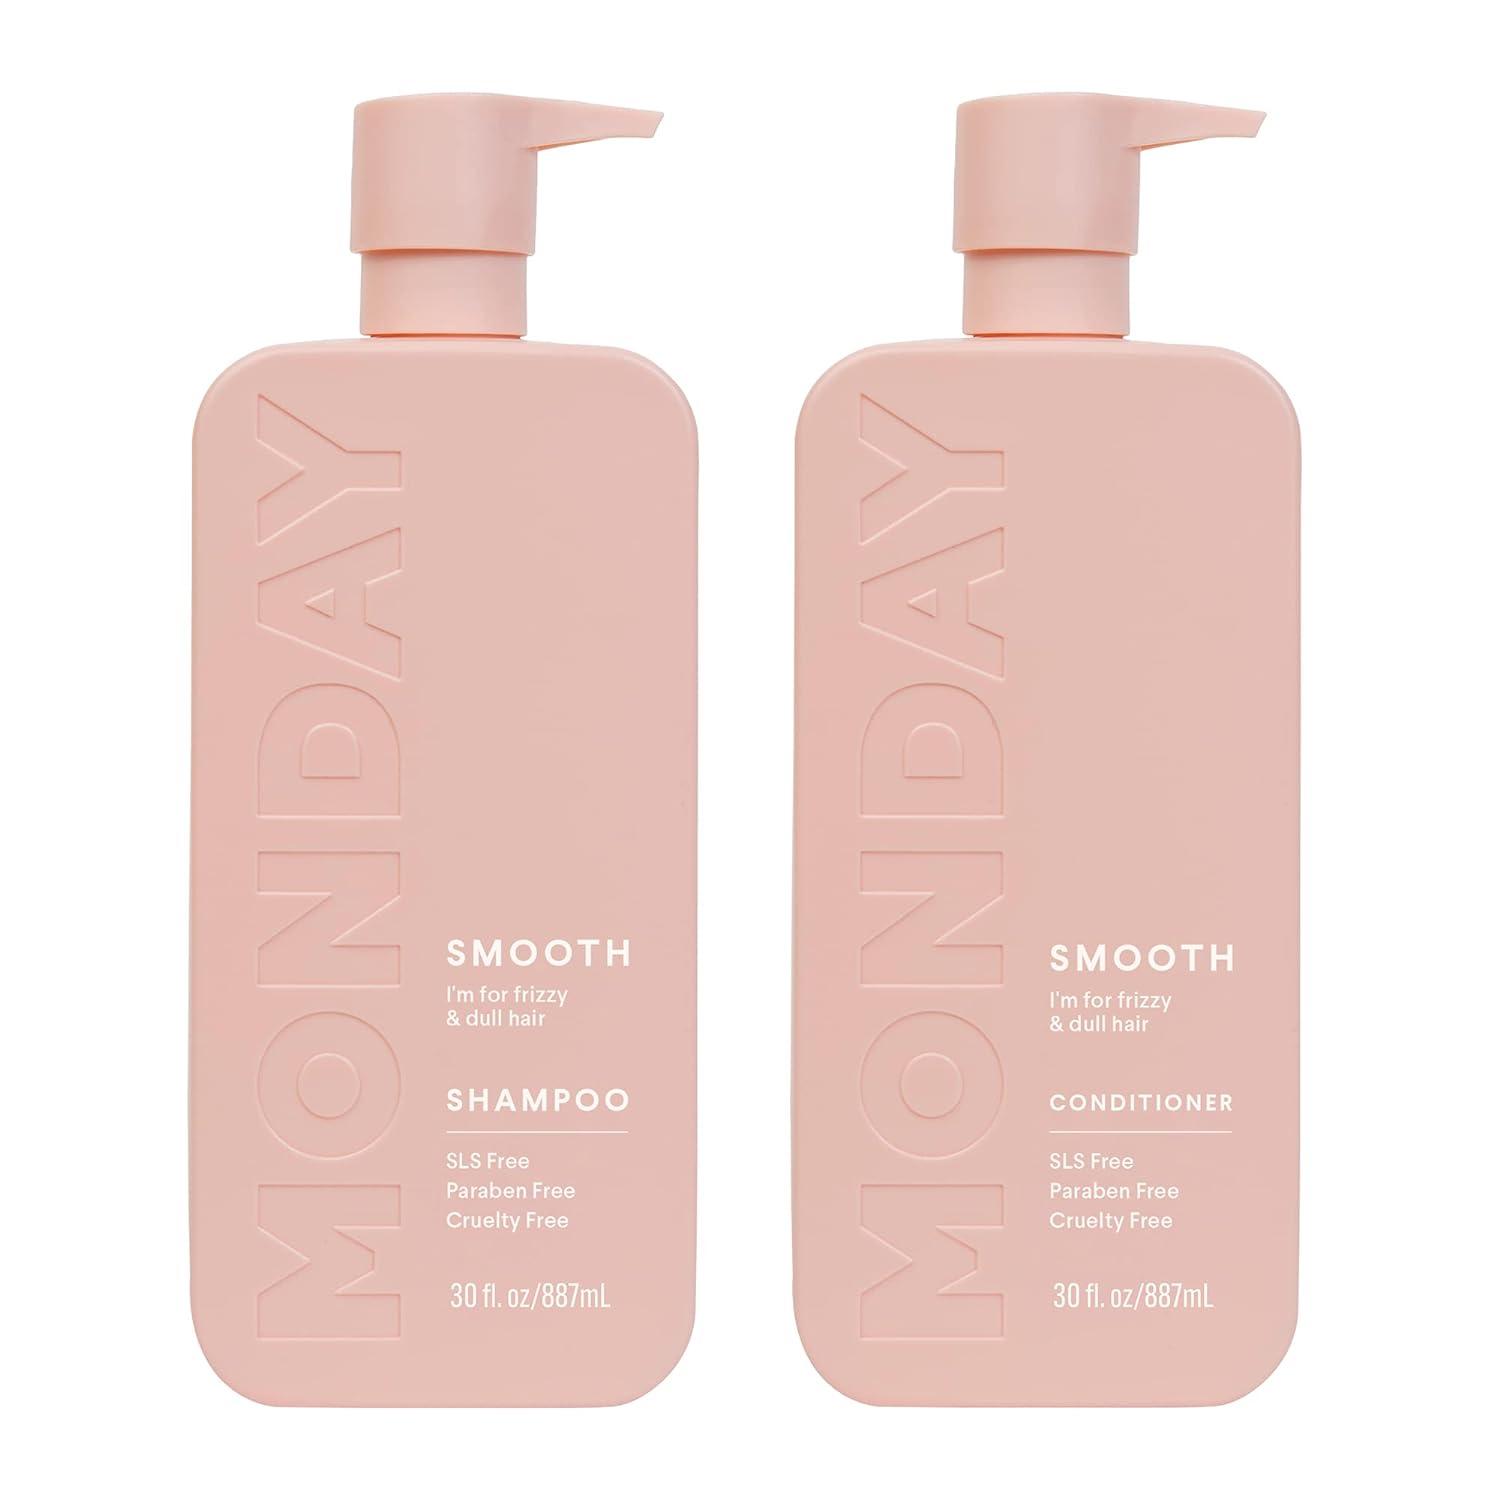 MONDAY HAIRCARE Smooth Shampoo + Conditioner Review